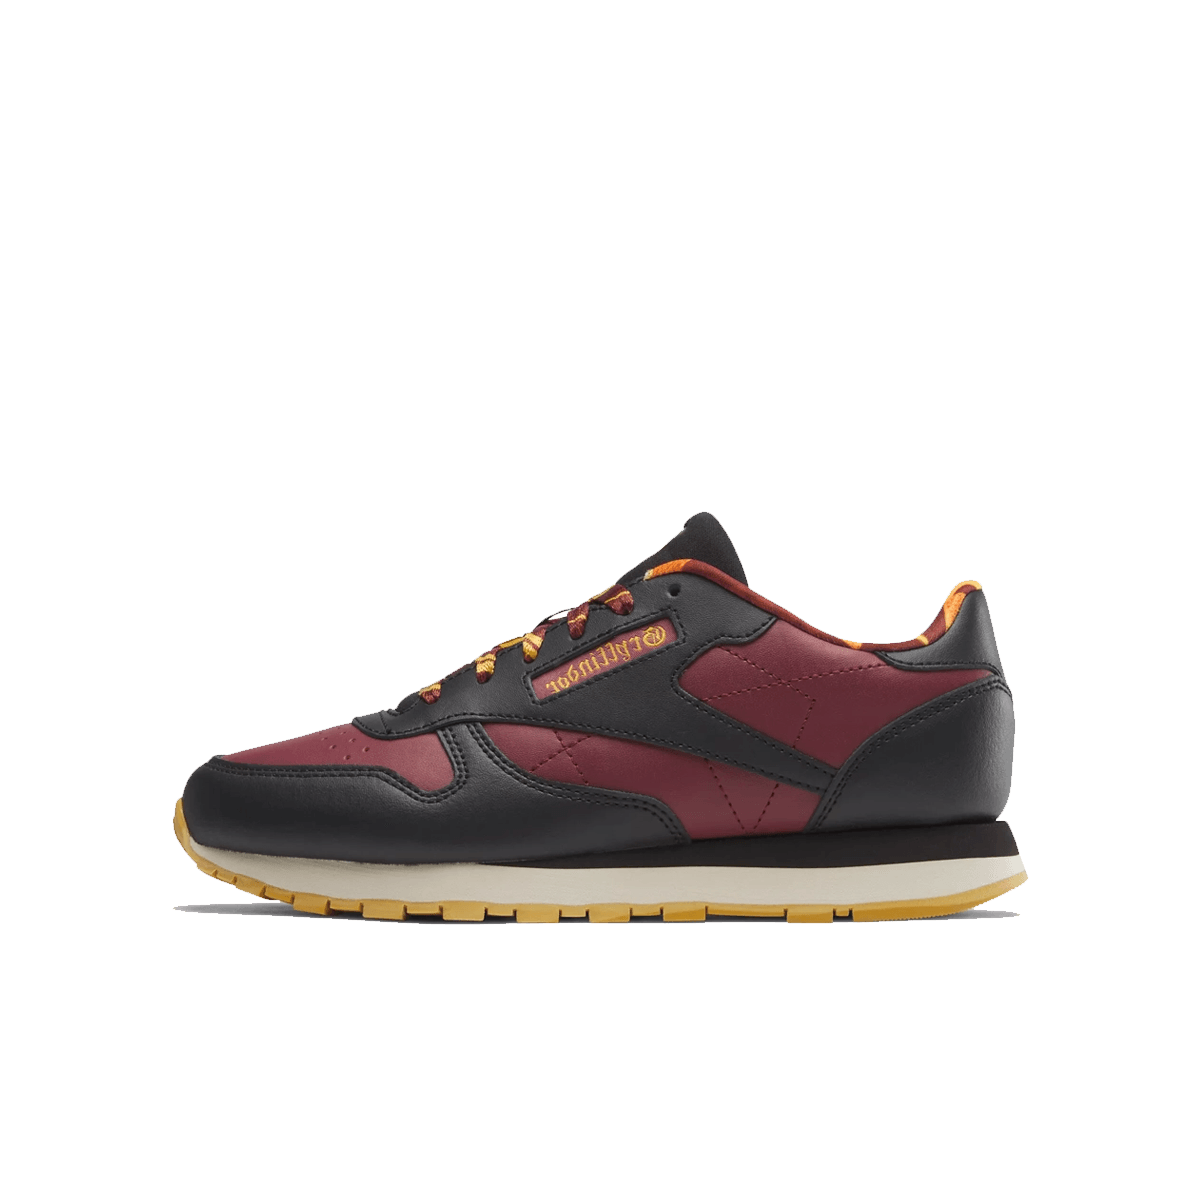 Harry Potter x Reebok Classic Leather GS 'Gryffindor'